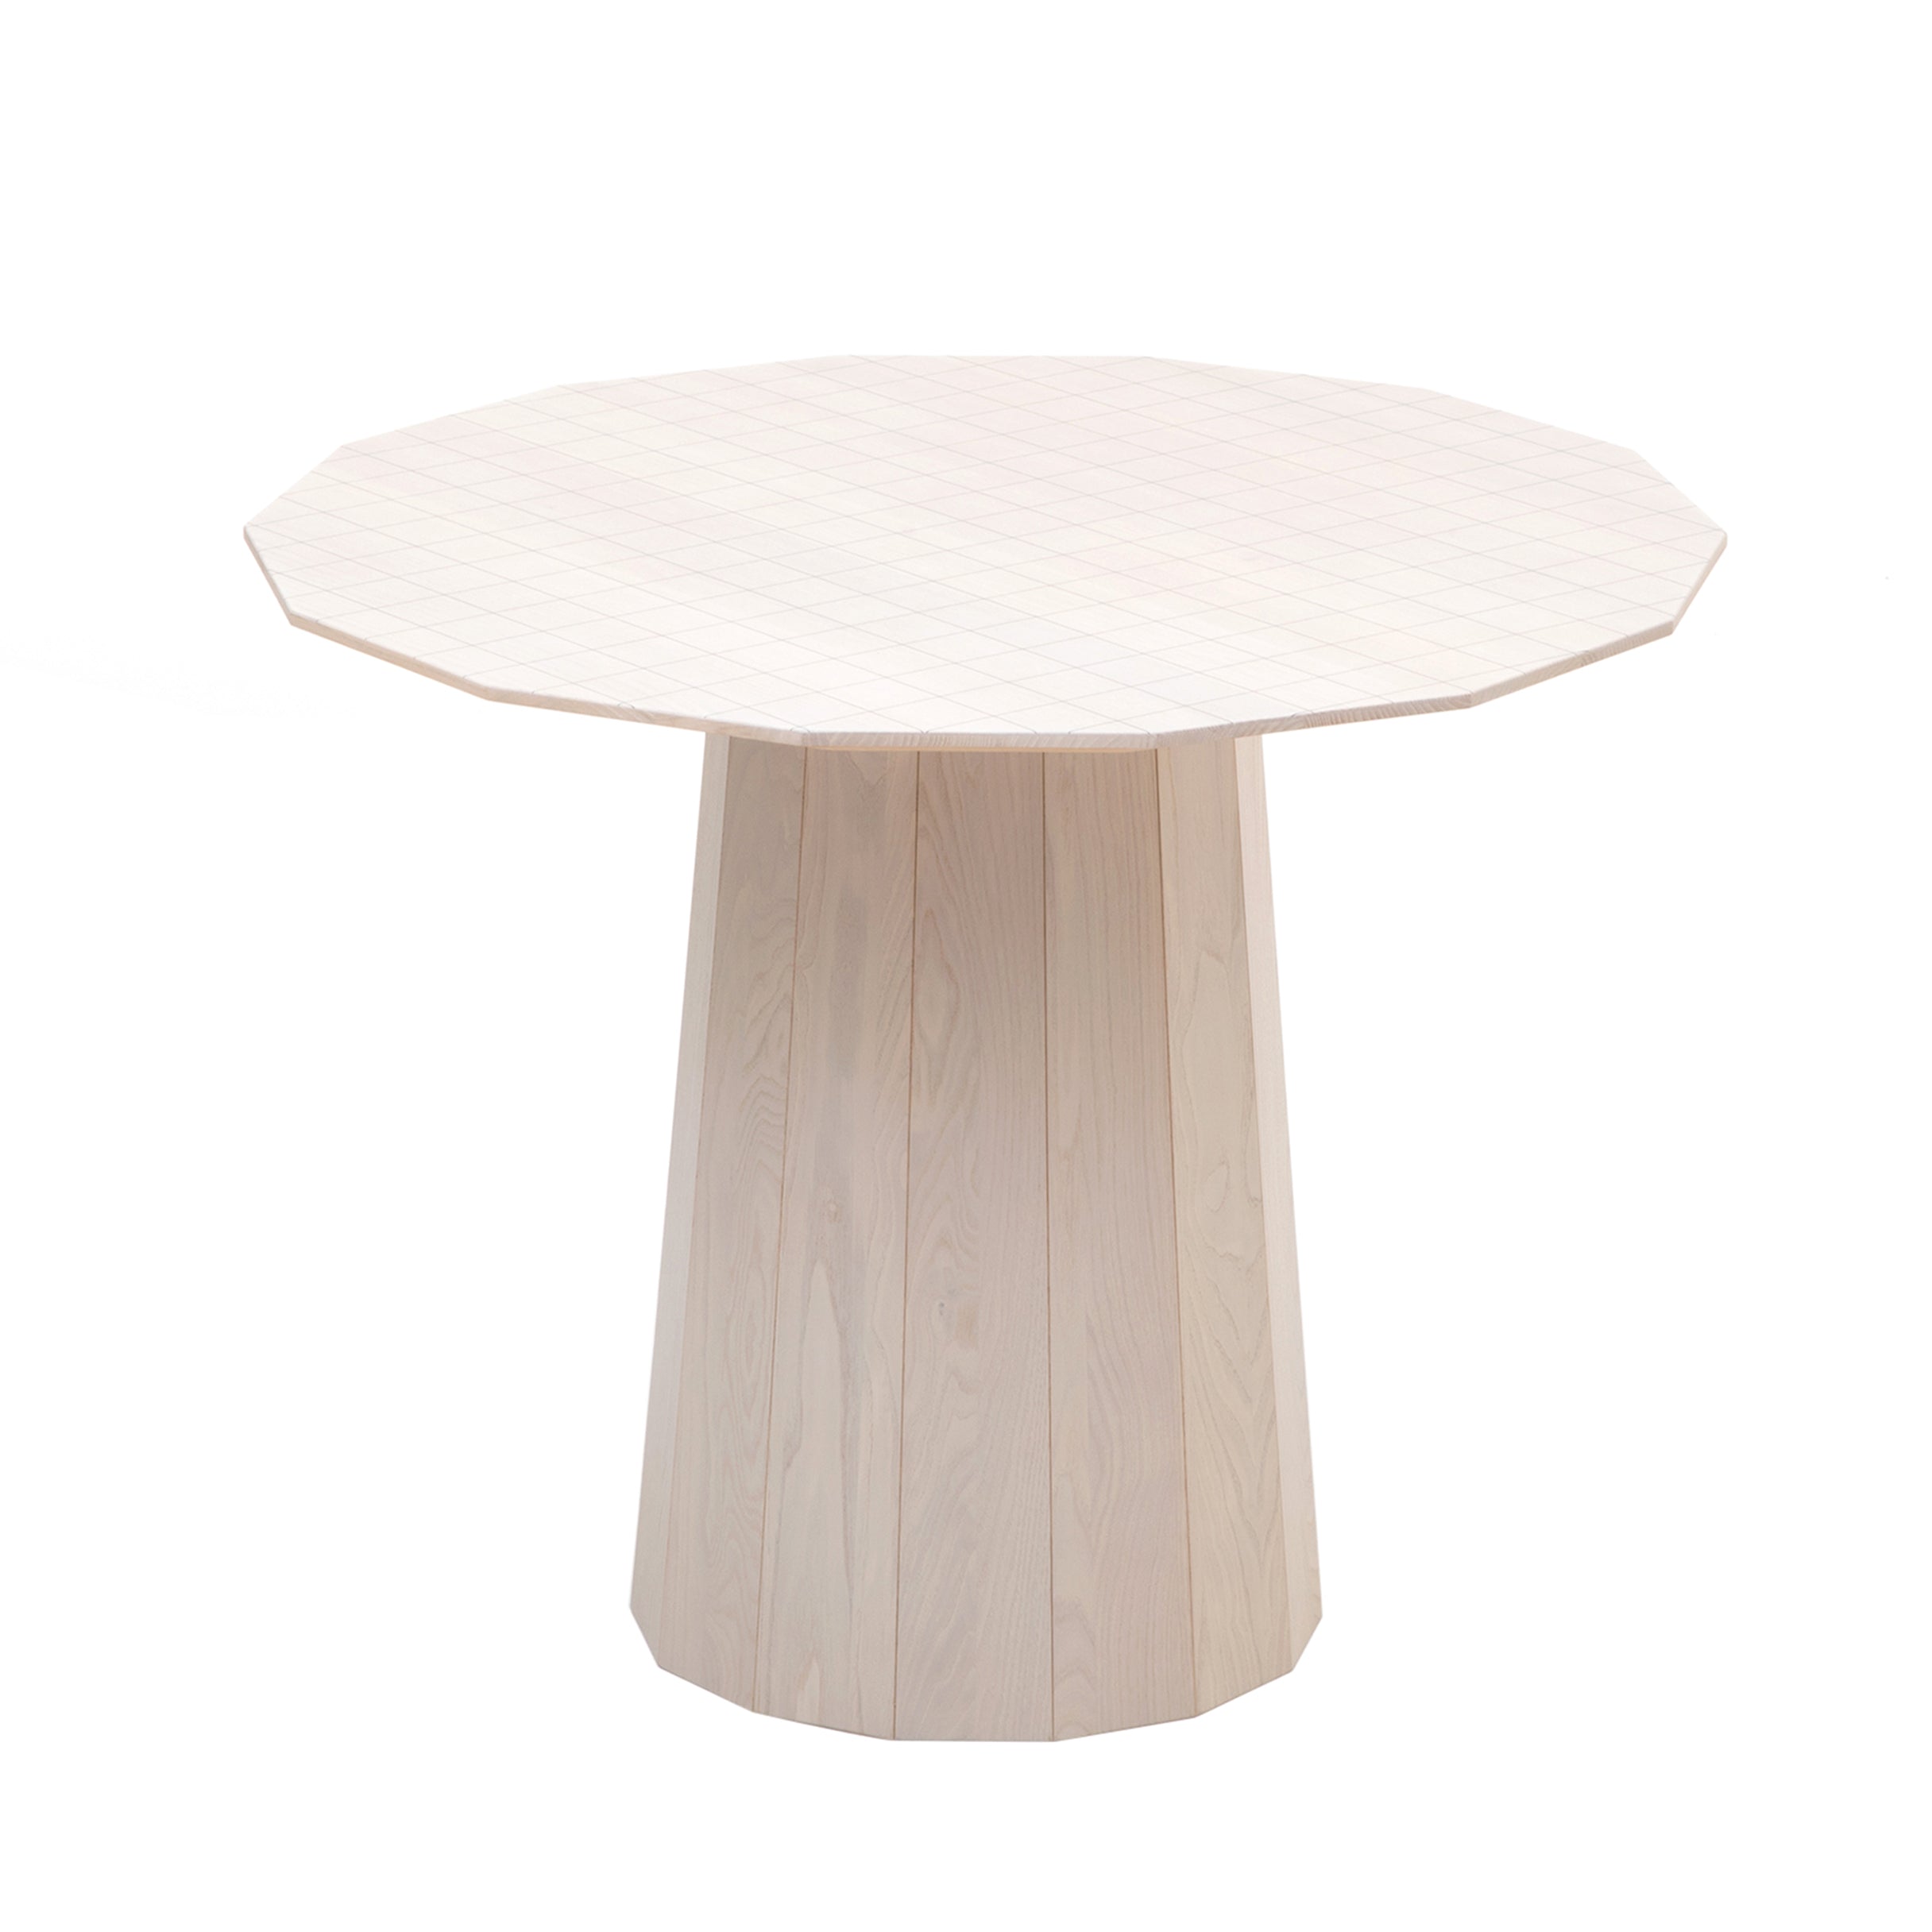 Colour Wood Dining Table: Small - 37.4